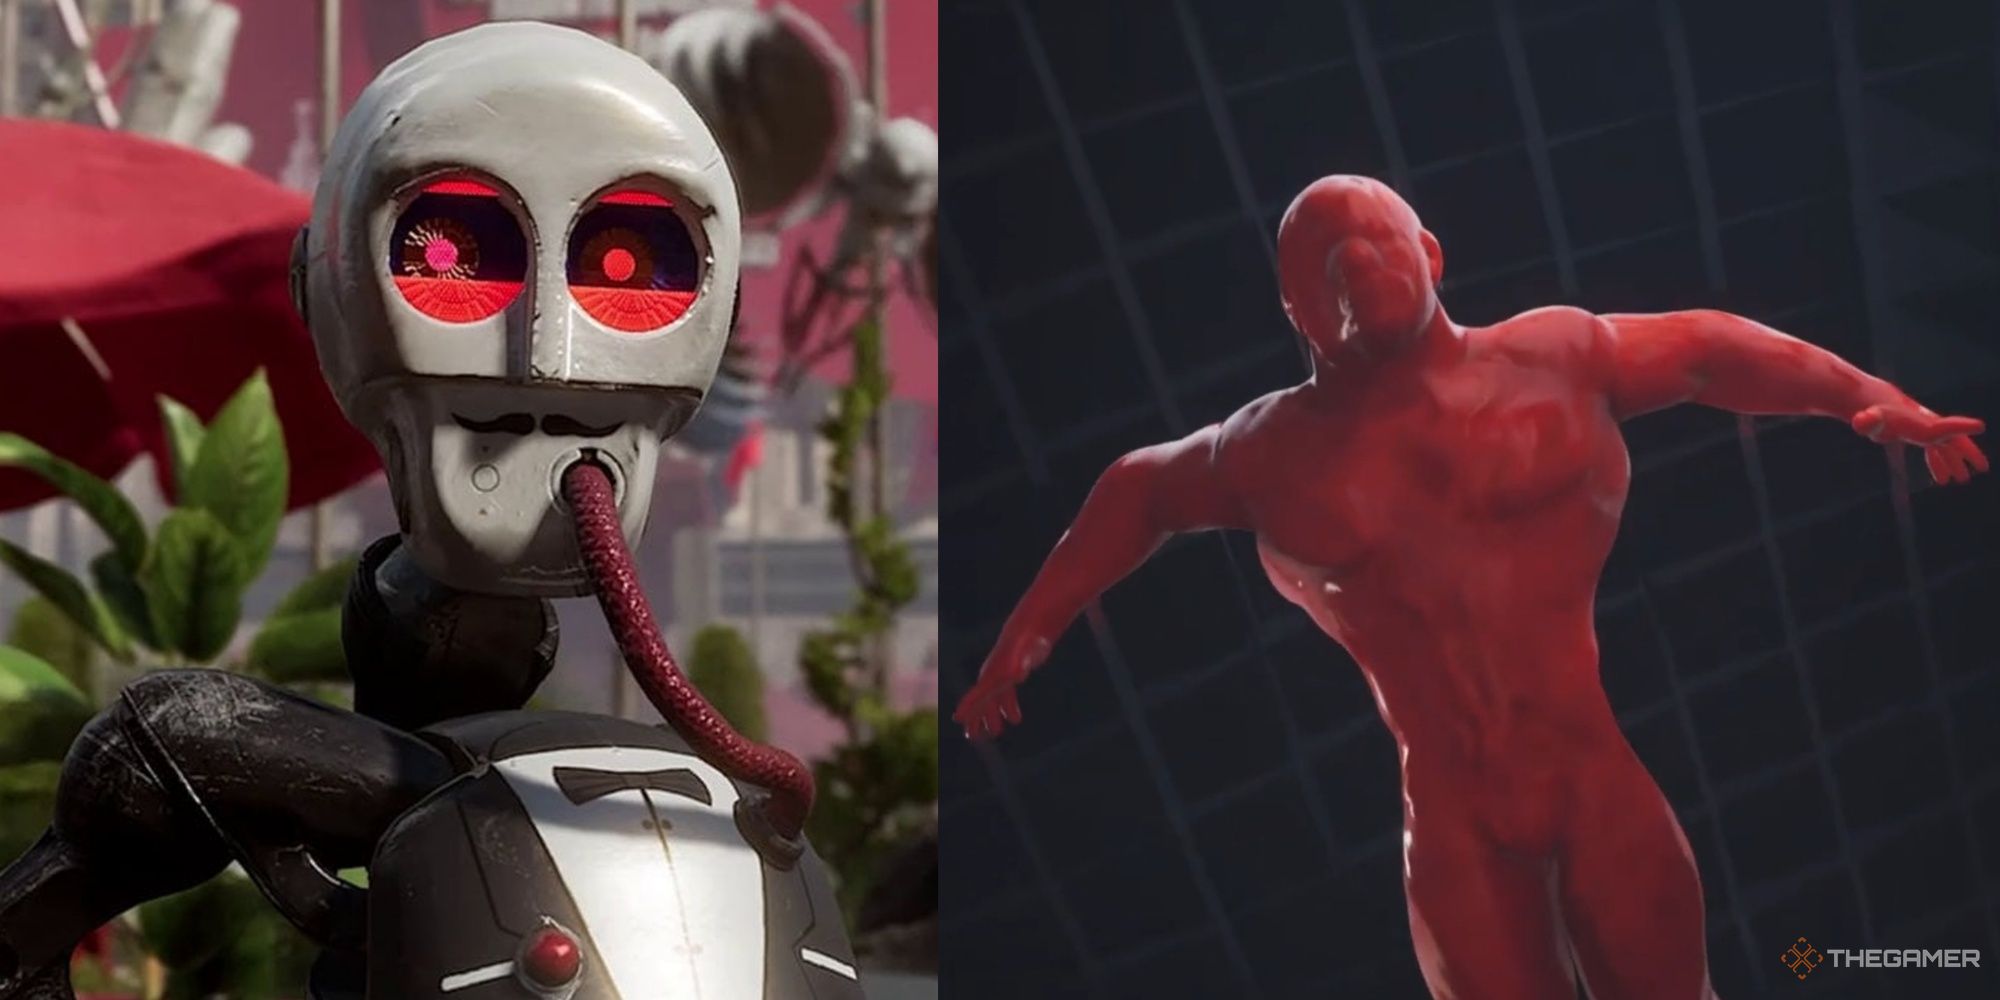 Atomic Heart: A Robotic Waiter And A Red Polymer Human Form